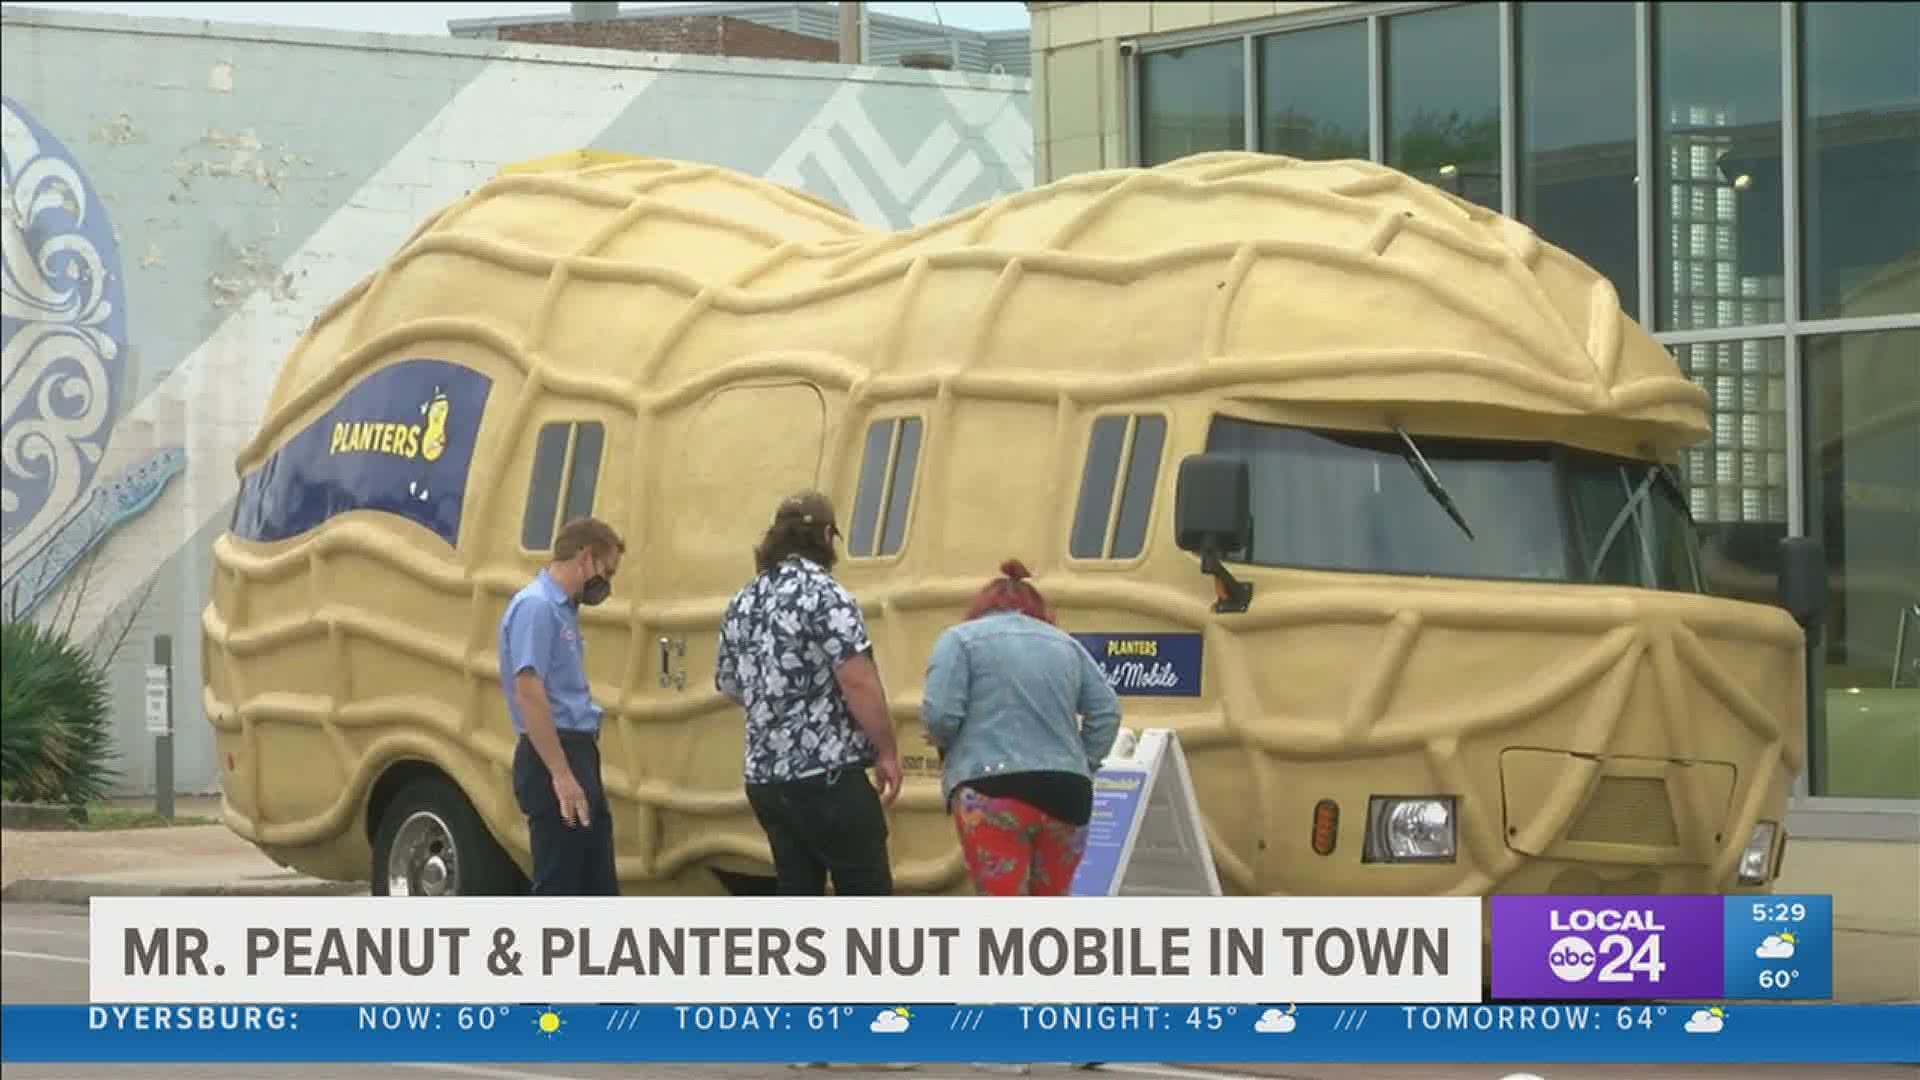 Planters Mobile visits the Mid-South